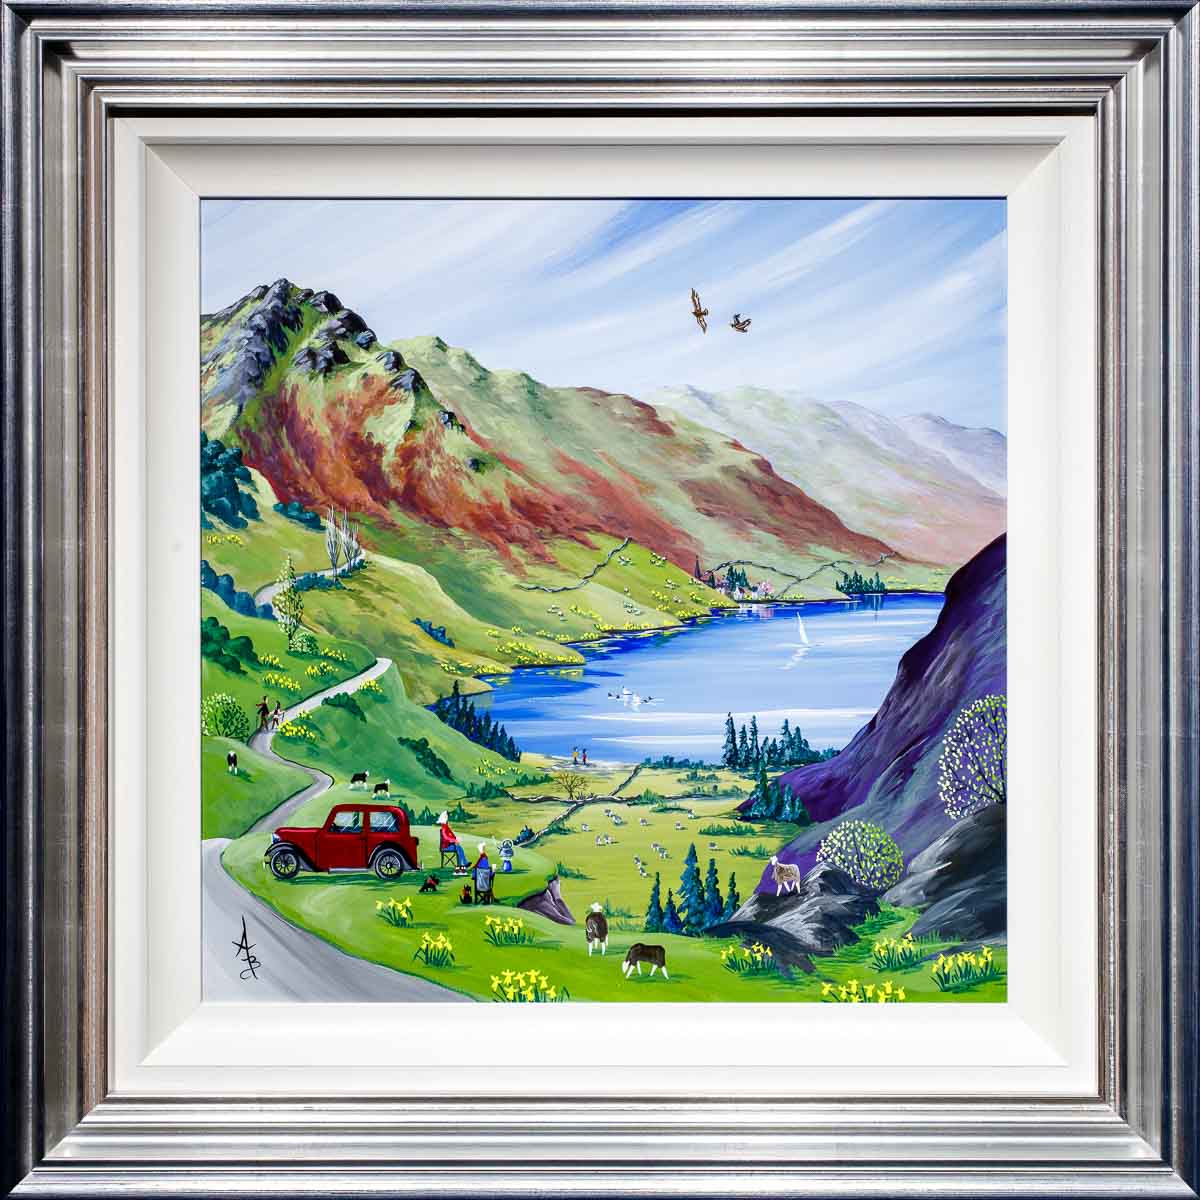 The Perfect Spot - Original Anne Blundell Framed